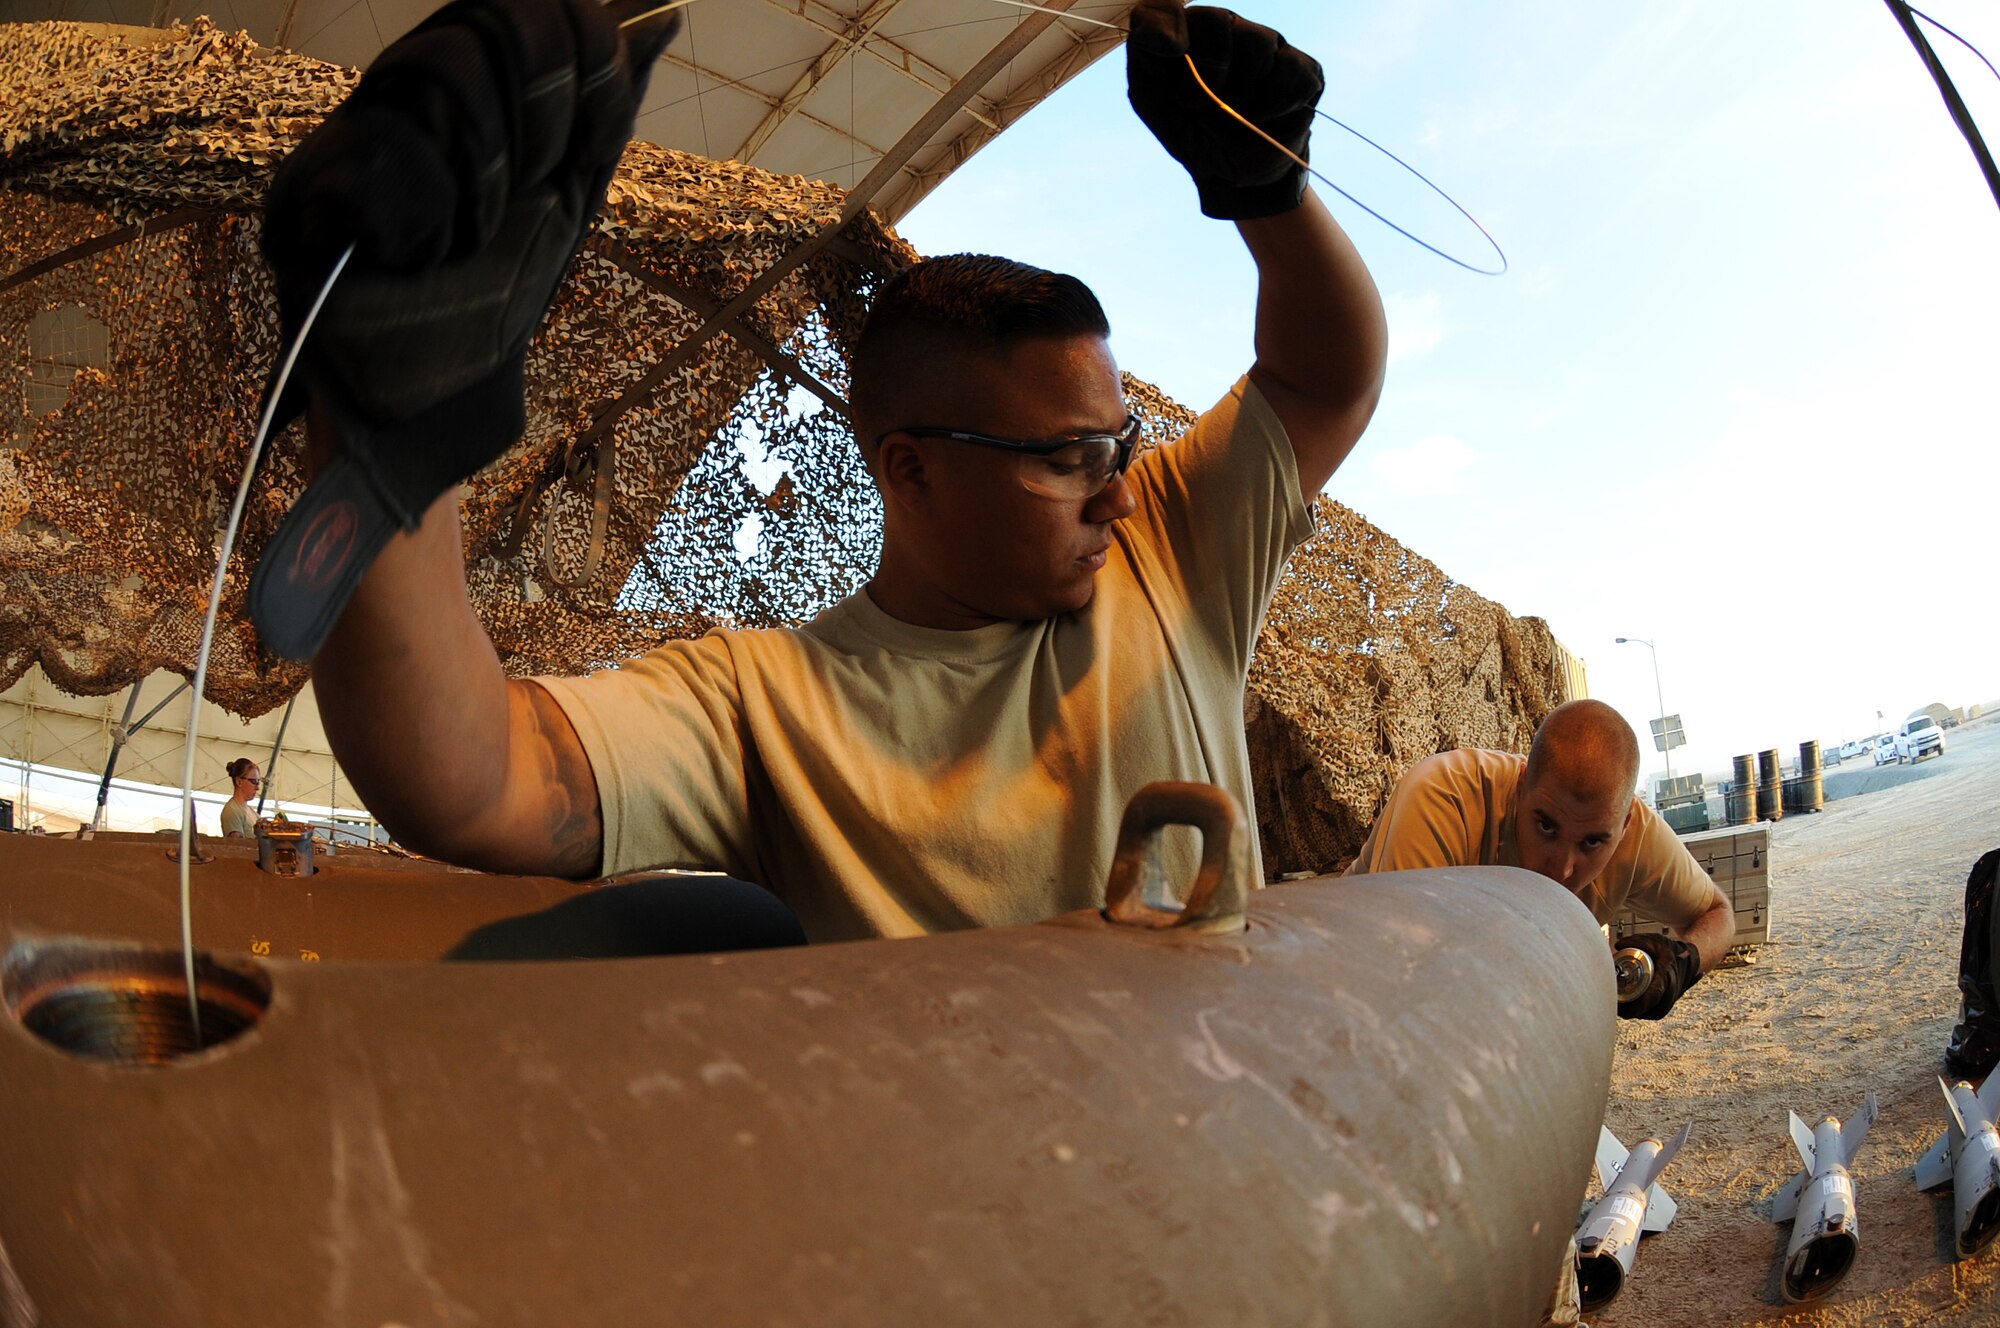 Airman 1st Class Luis assists Senior Airman Adam with feeding a power cable into a MK-82 bomb conduit Dec. 21, 2014, in Southwest Asia.  This process is needed to ensure the electrical current generated by the FZU-55 bomb initiator will be fed to the fuze.  Both Airmen are deployed from Seymour Johnson Air Force Base, N.C.   (U.S. Air Force photo/Senior Master Sgt. Carrie Hinson)